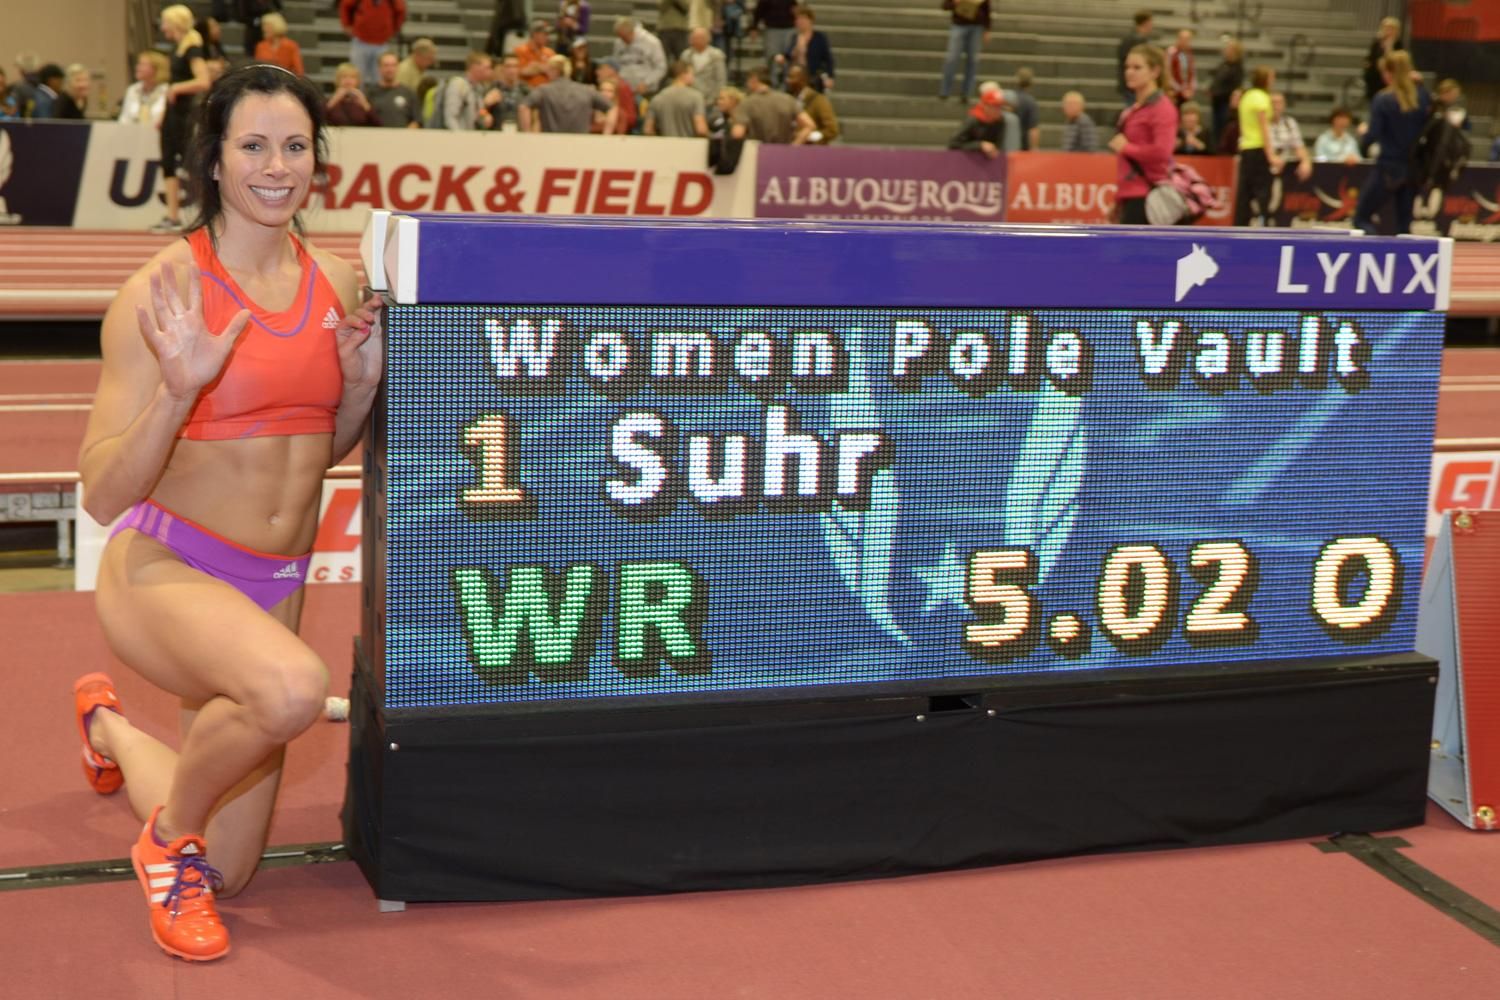 Jenn Suhr next to the scoreboard after clearing 5.02m